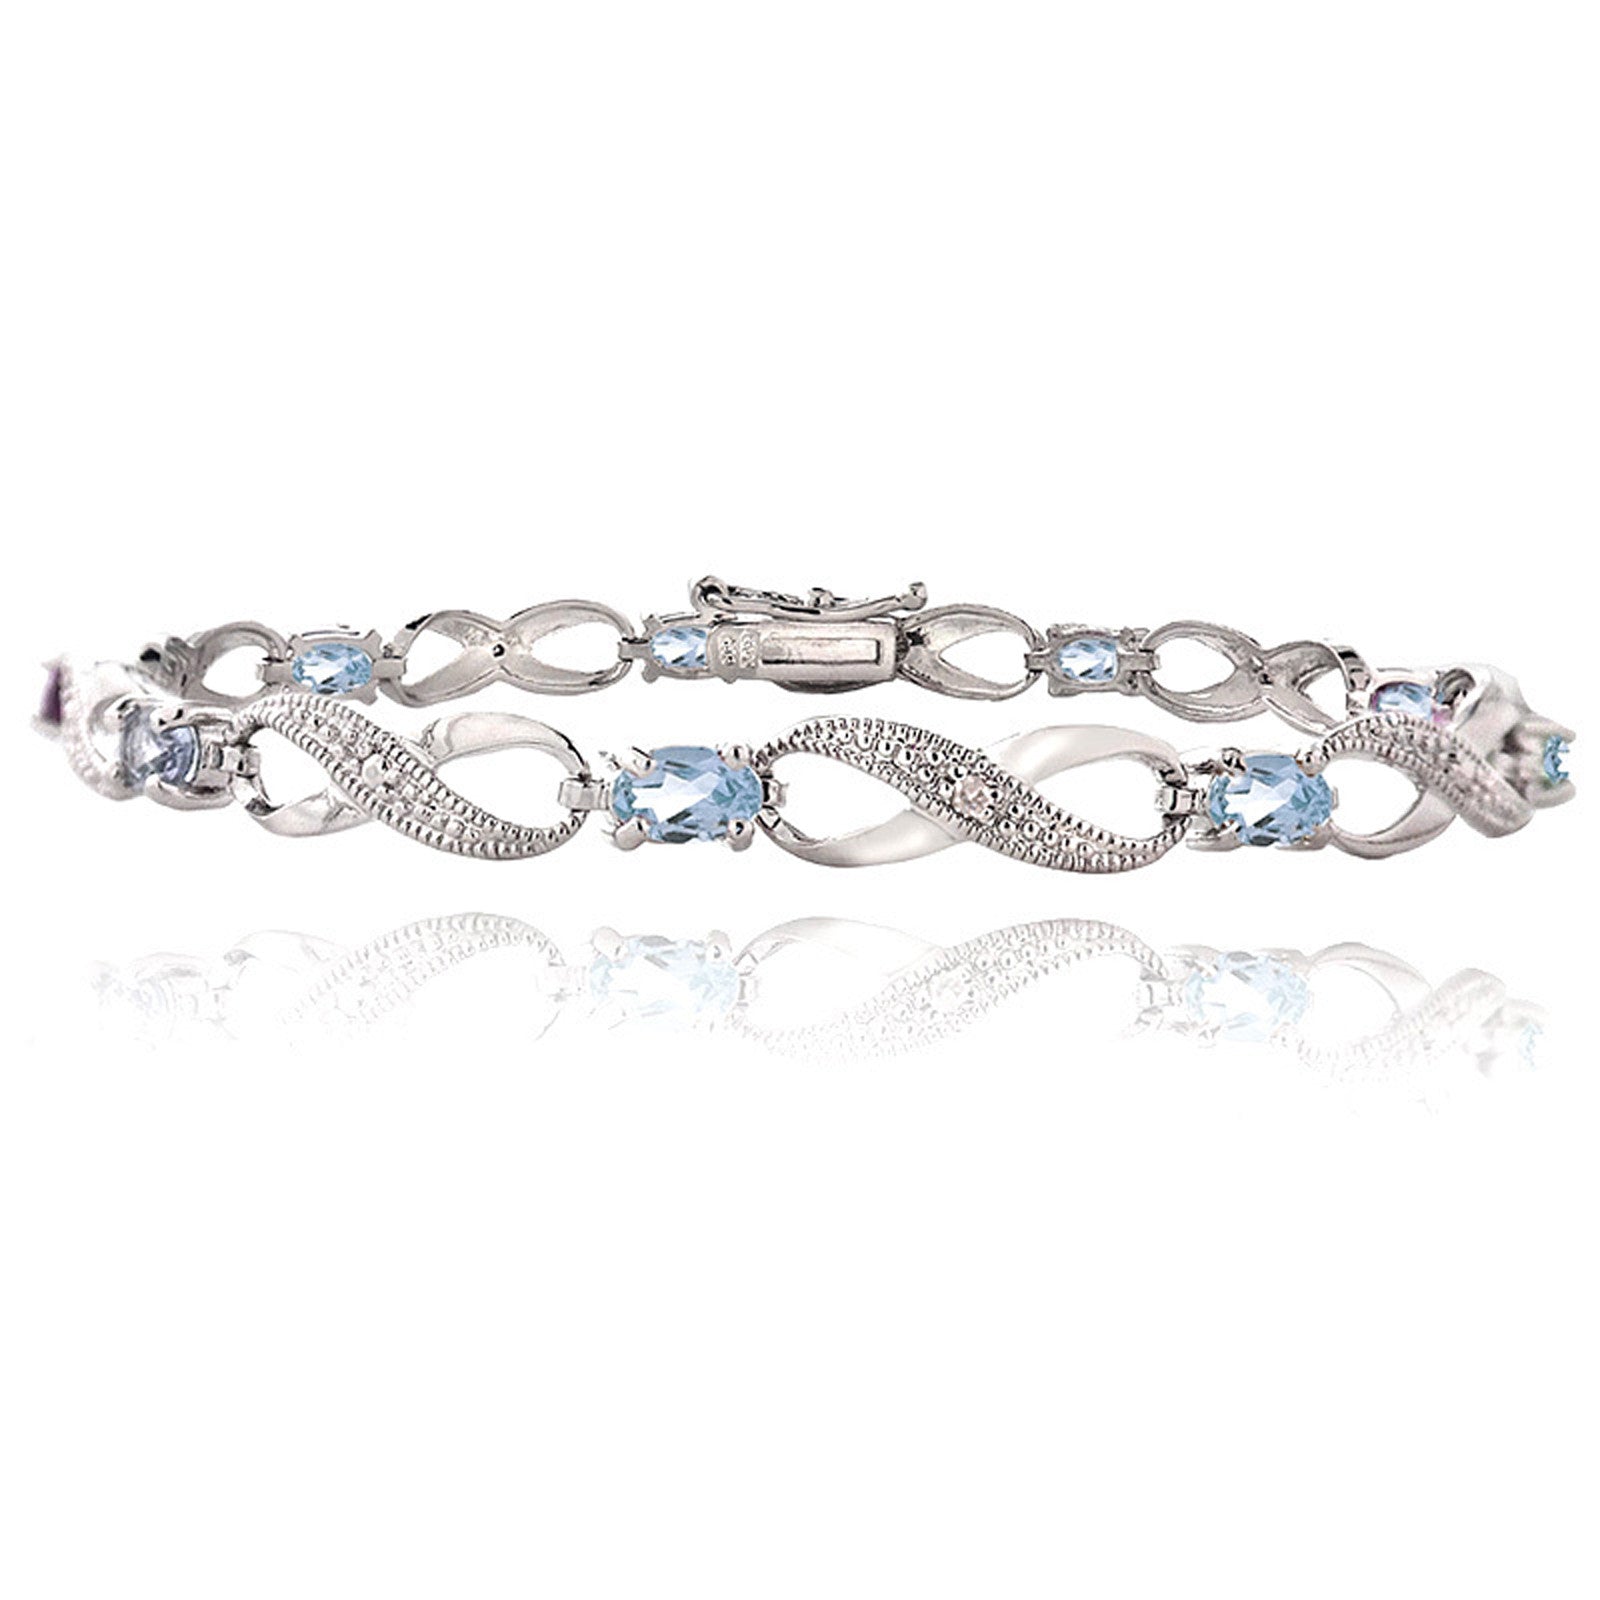 Infinity Bracelet With Diamond & Gem Accents in a Linked Style - Blue Topaz